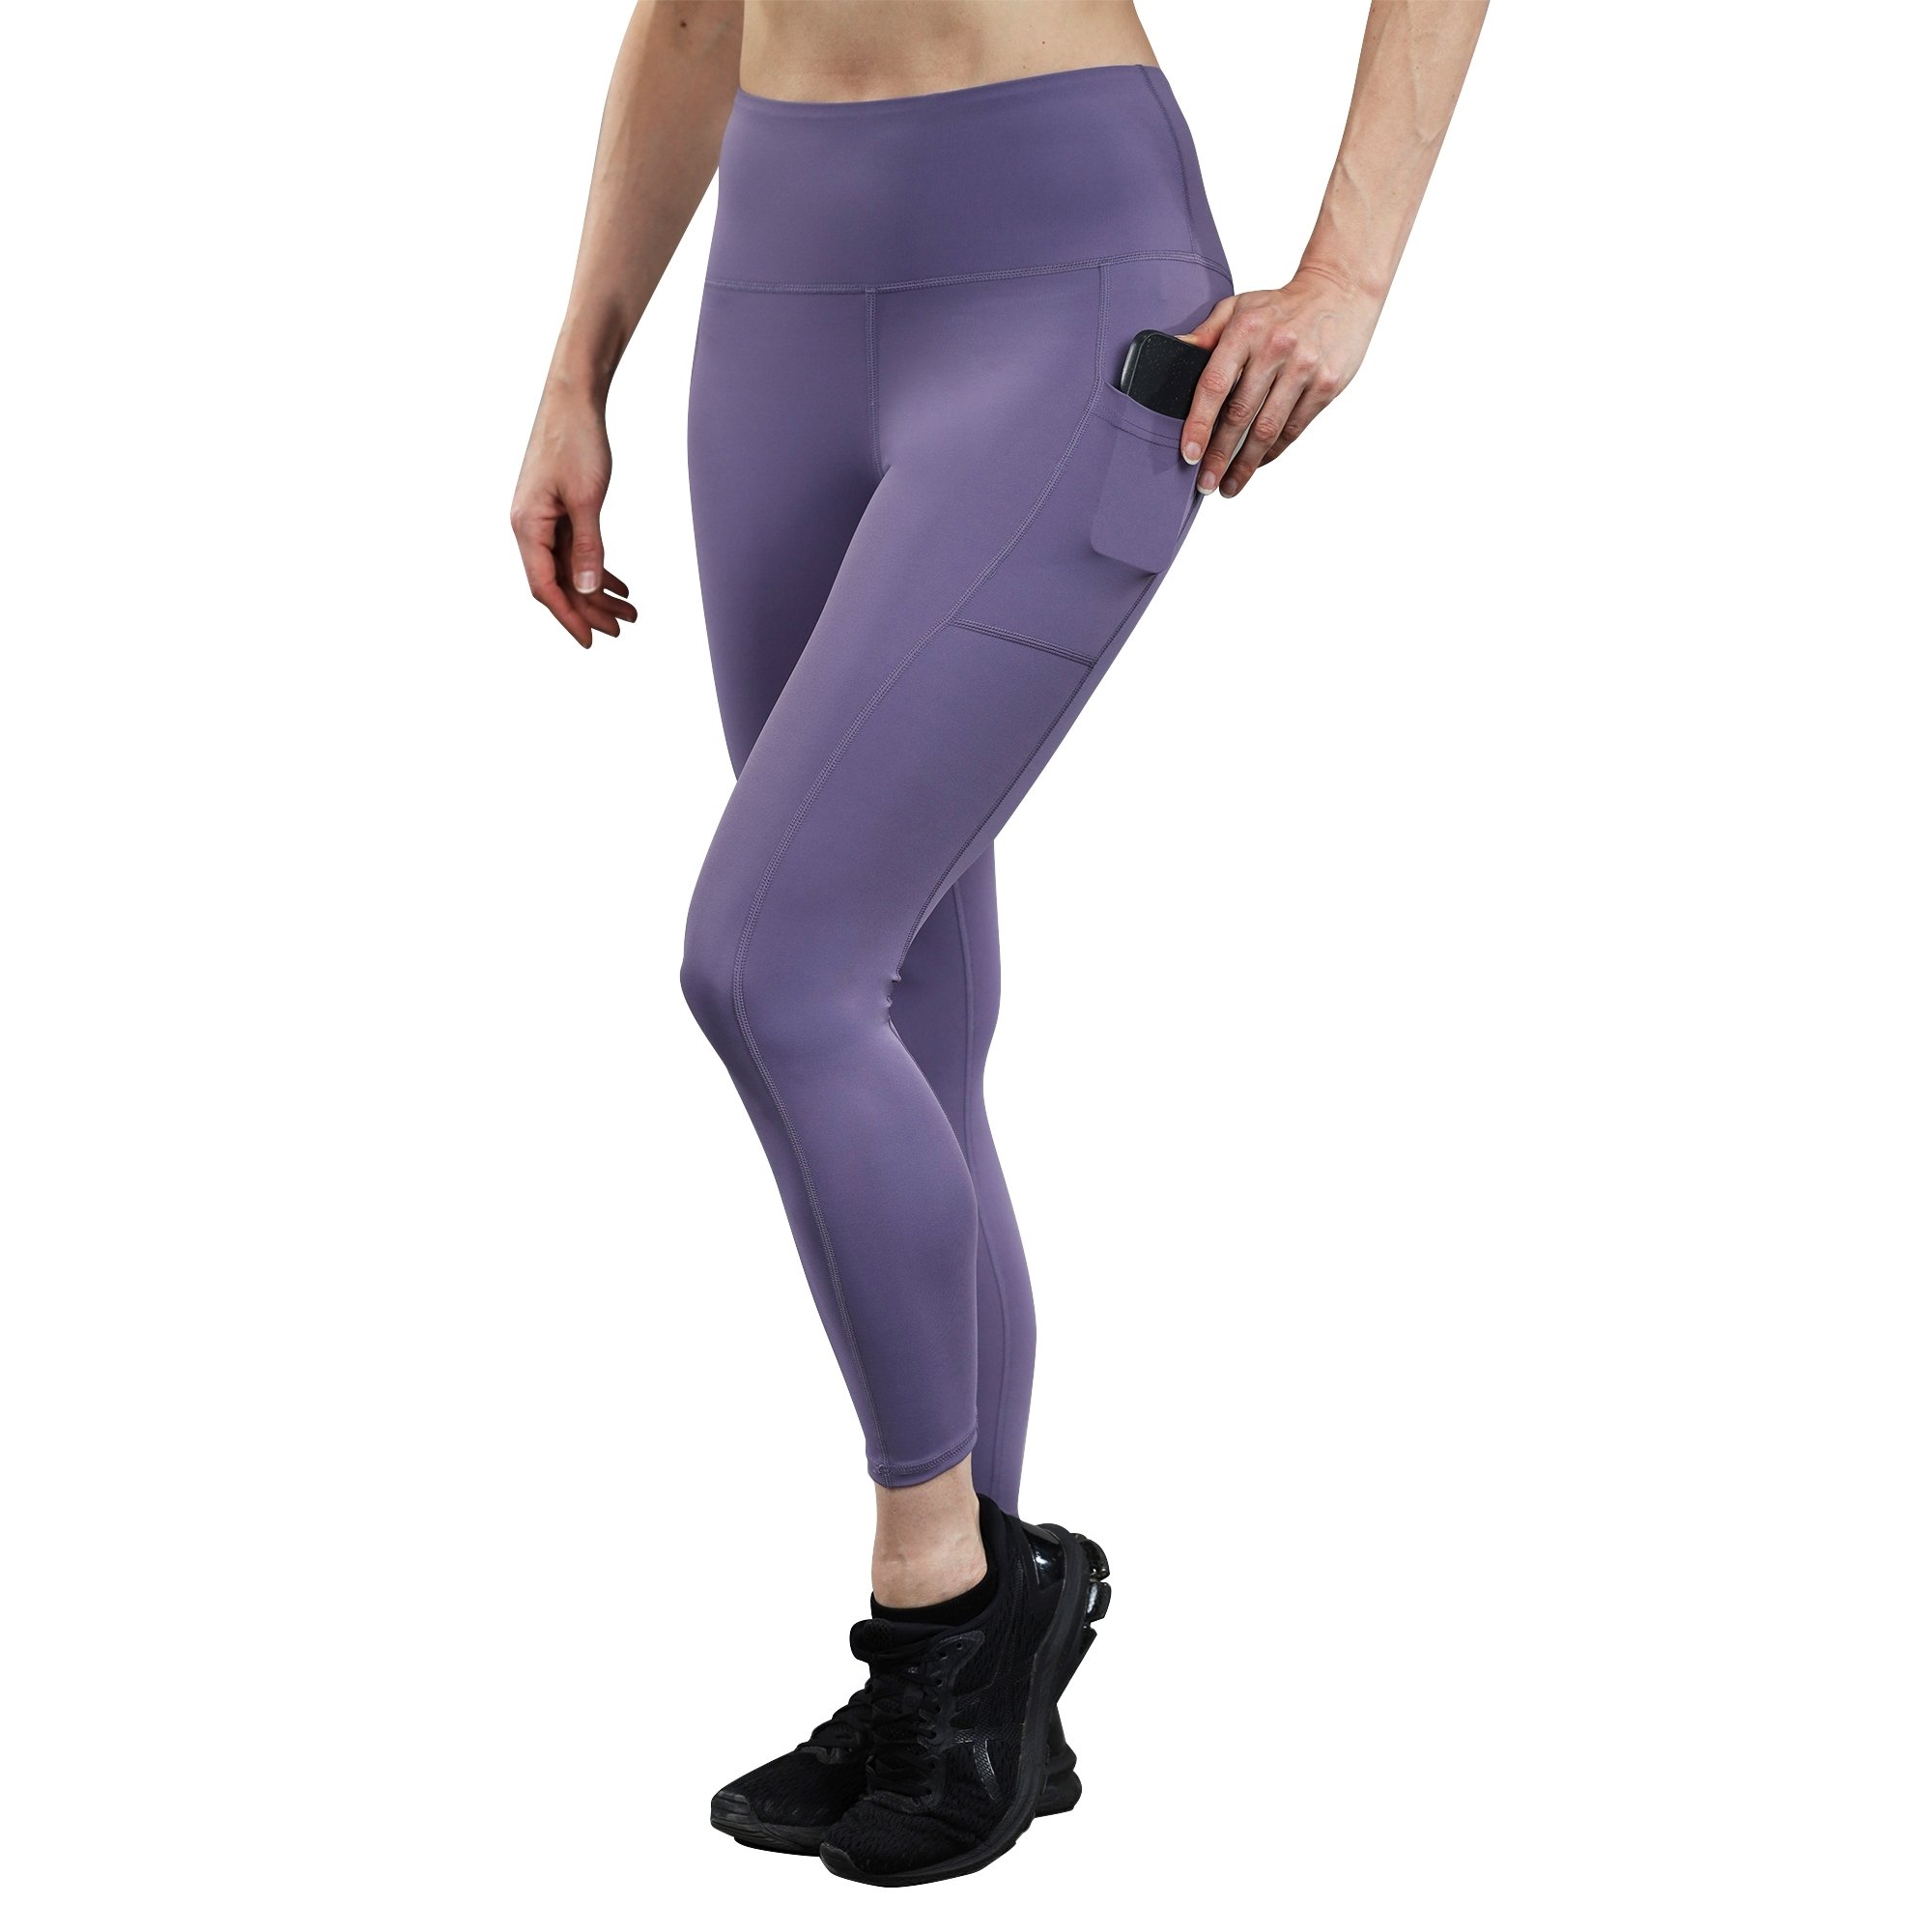 Danzcue Women's High Waisted Soft Yoga Pants with Pockets, Workout Running Leggings for Women - Click Image to Close